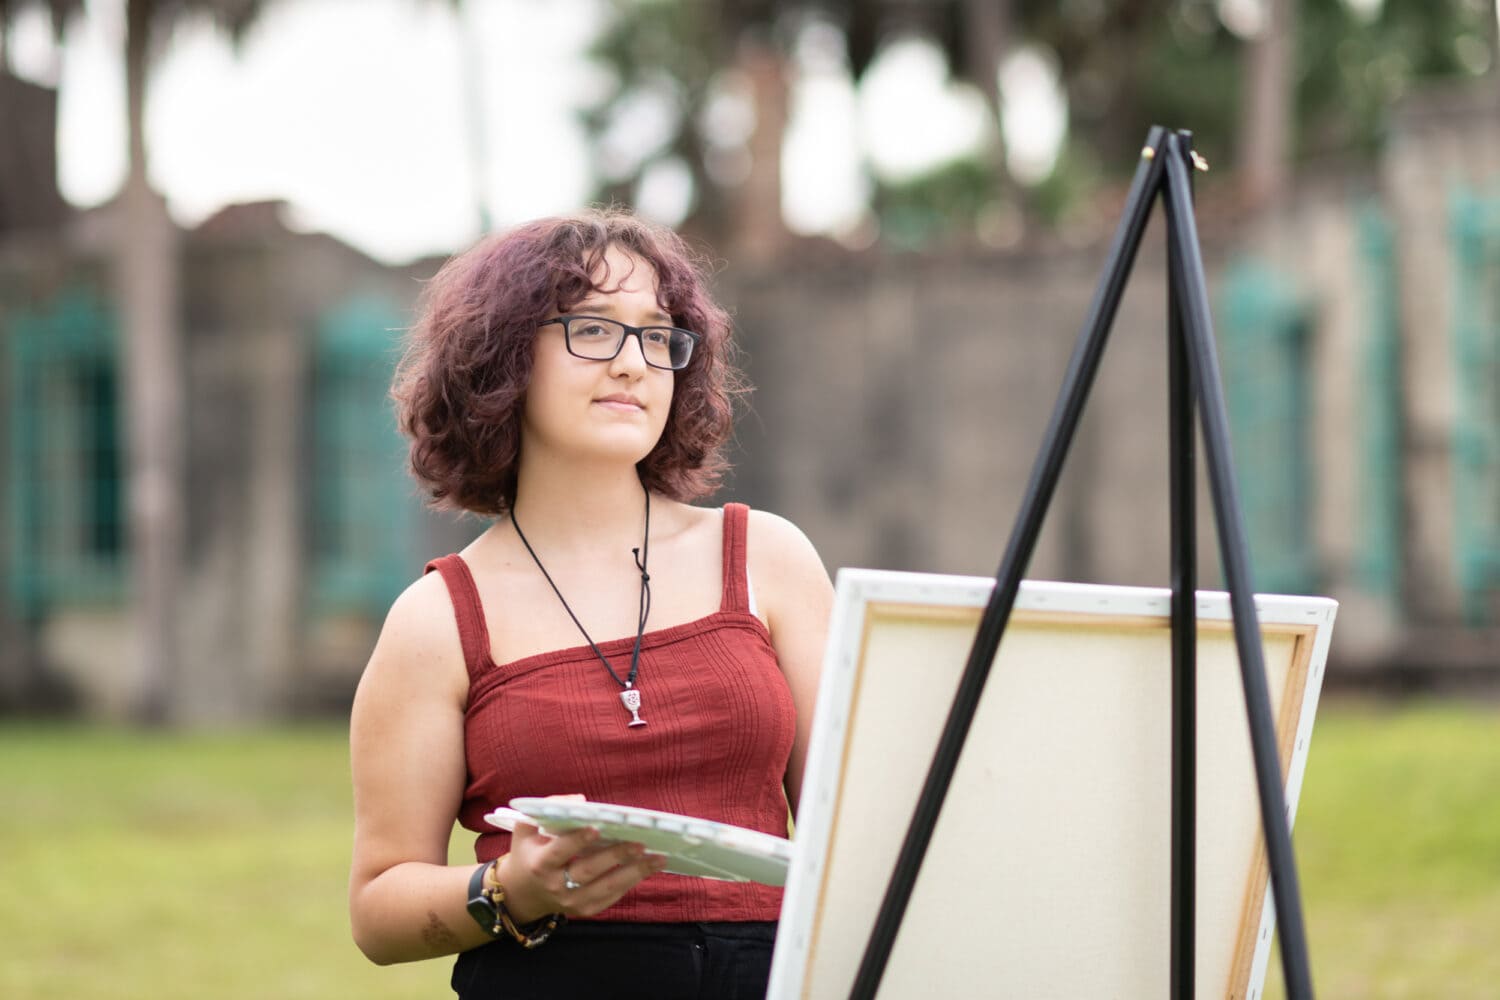 Senior portraits by the ocean and Atalaya Castle for an artist with her canvas and paints - Huntington Beach State Park